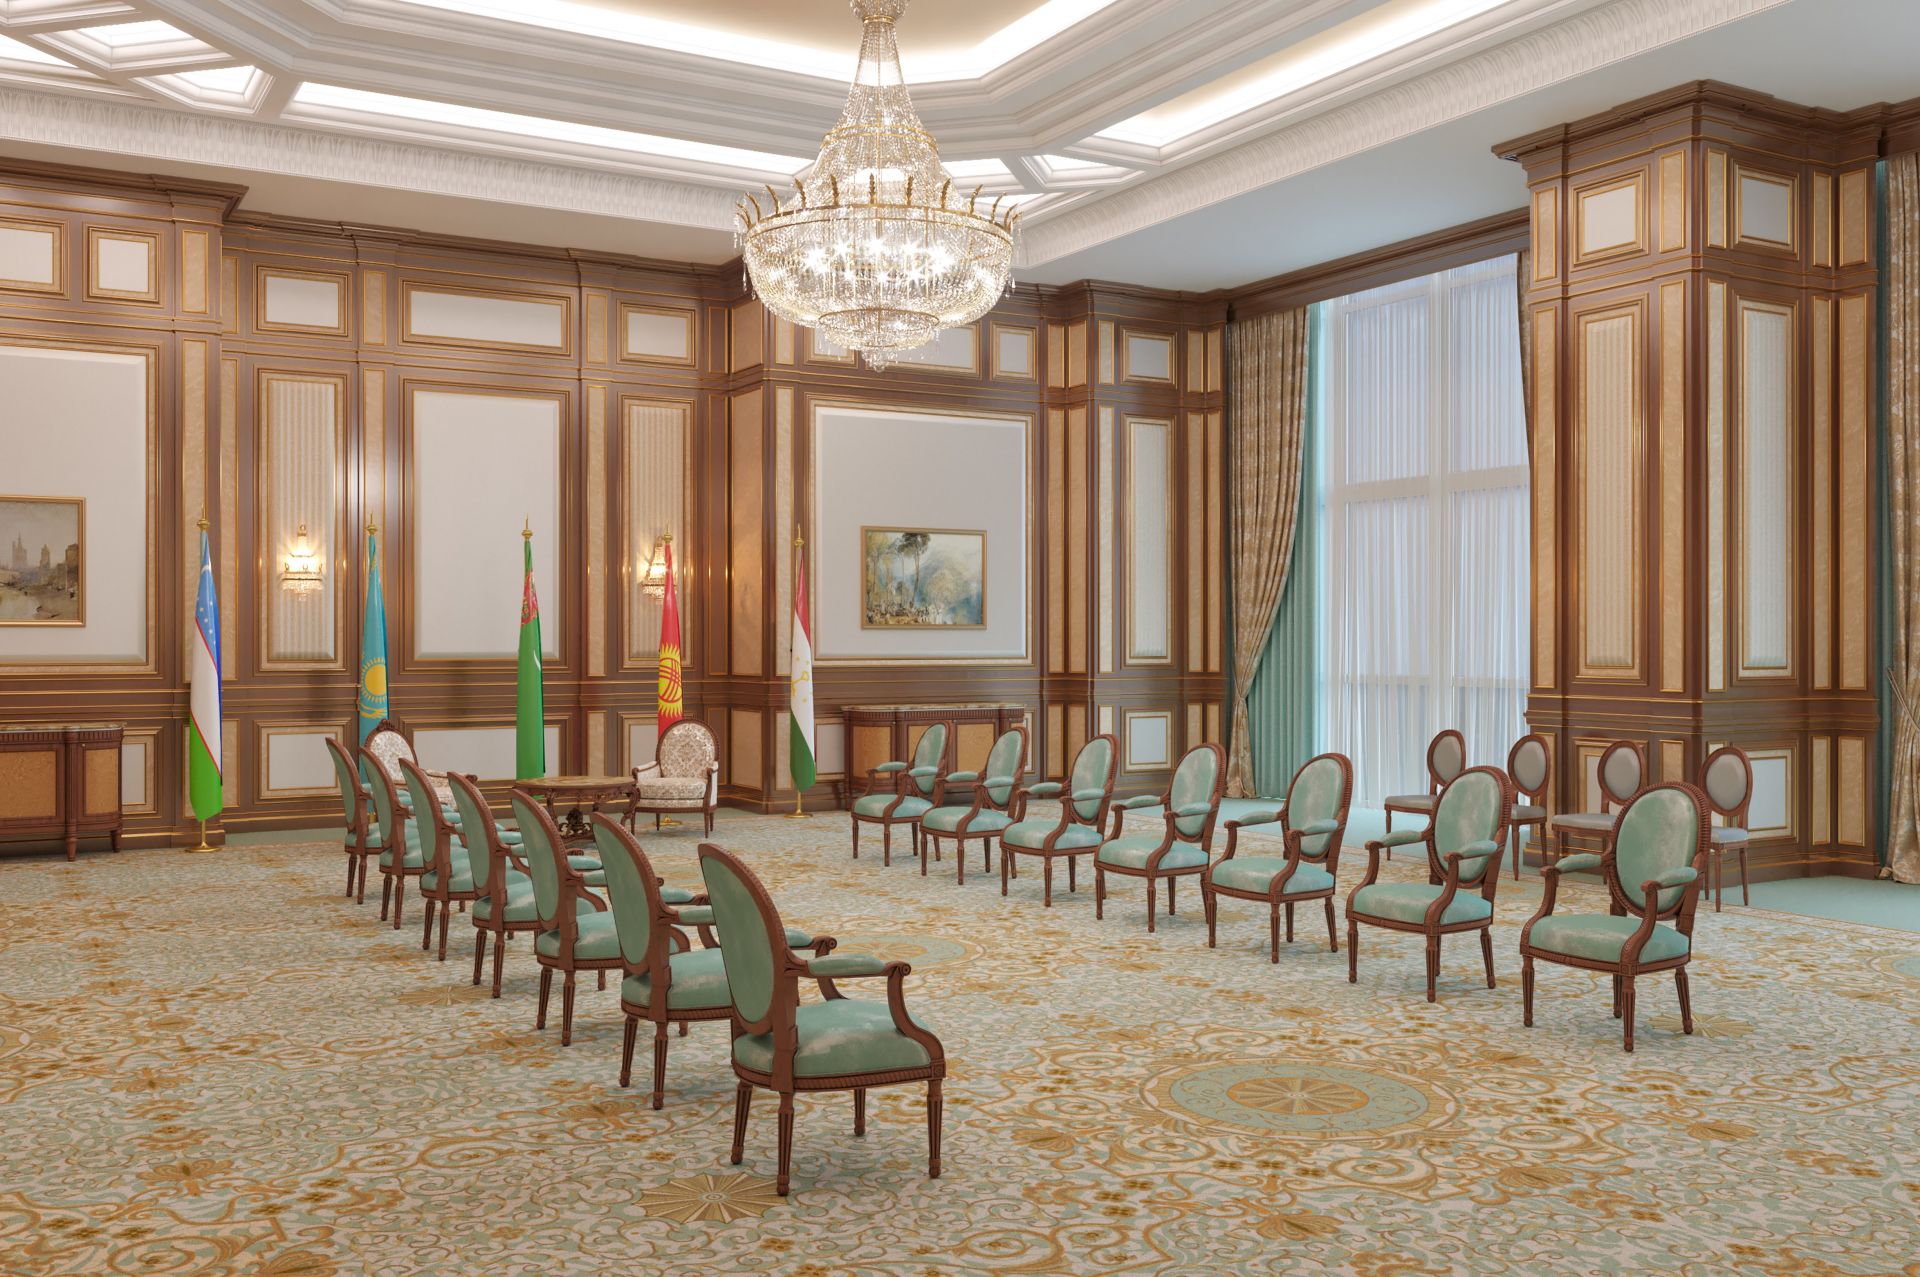 Meeting room, classic-style interior